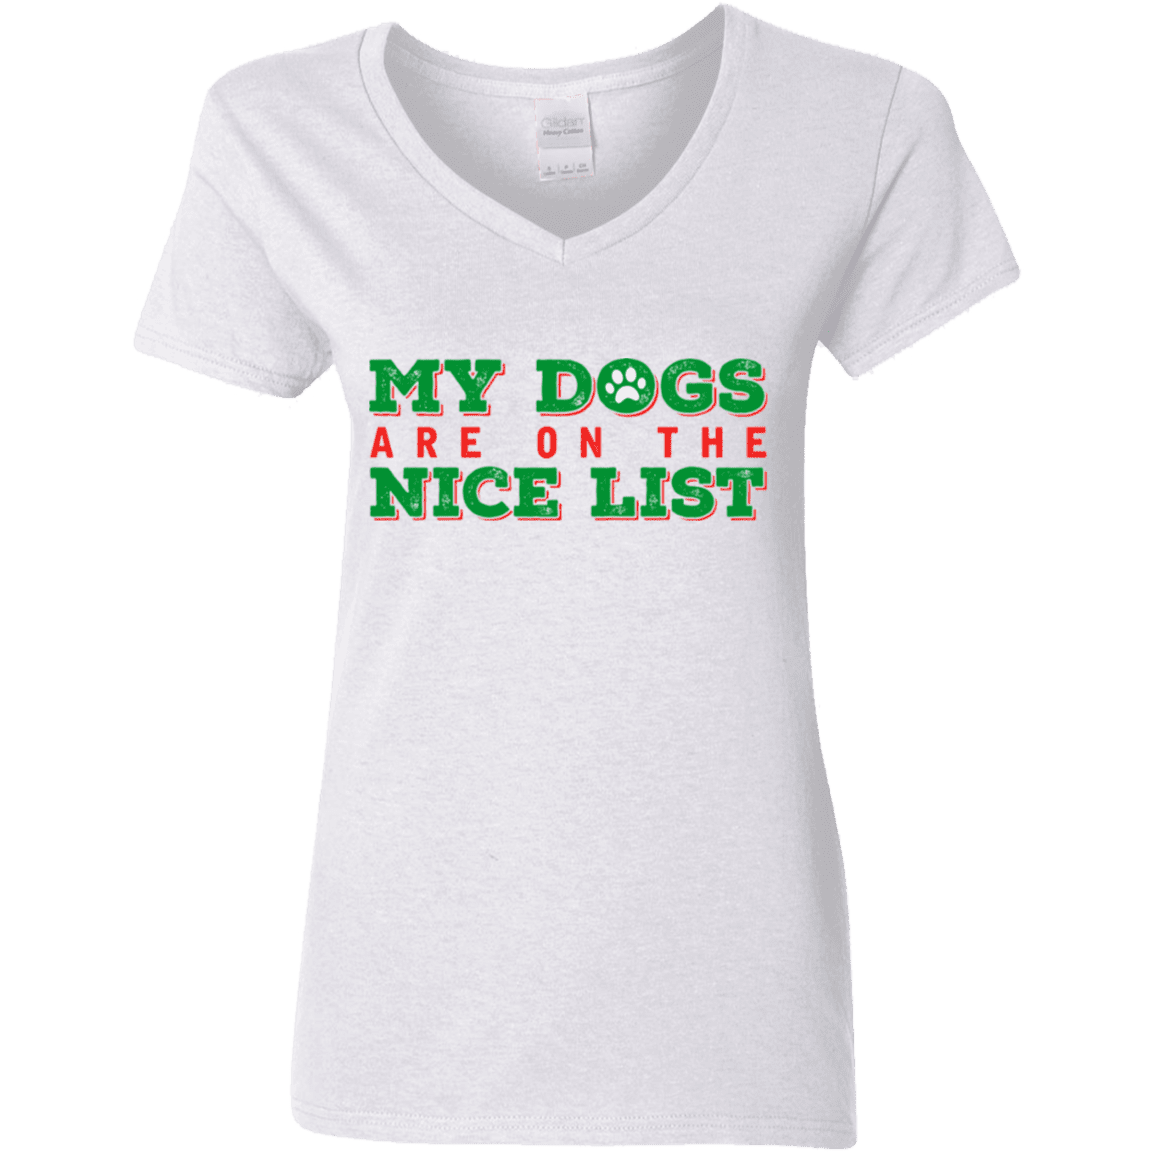 My Dogs Are On The Nice List - Ladies V Neck.